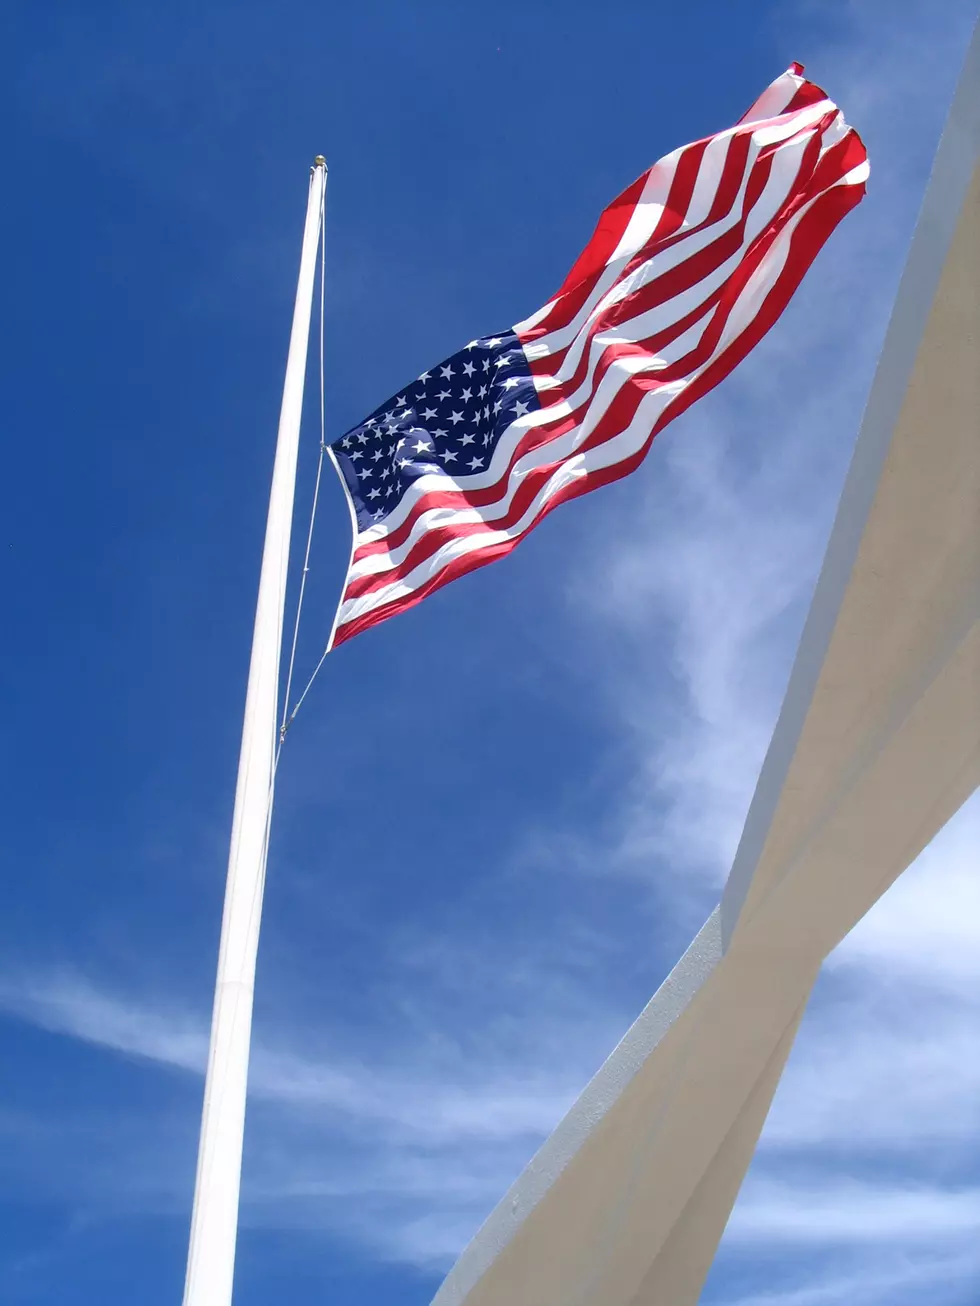 Flags Half-Staff in South Dakota to Honor 9-11 Victims